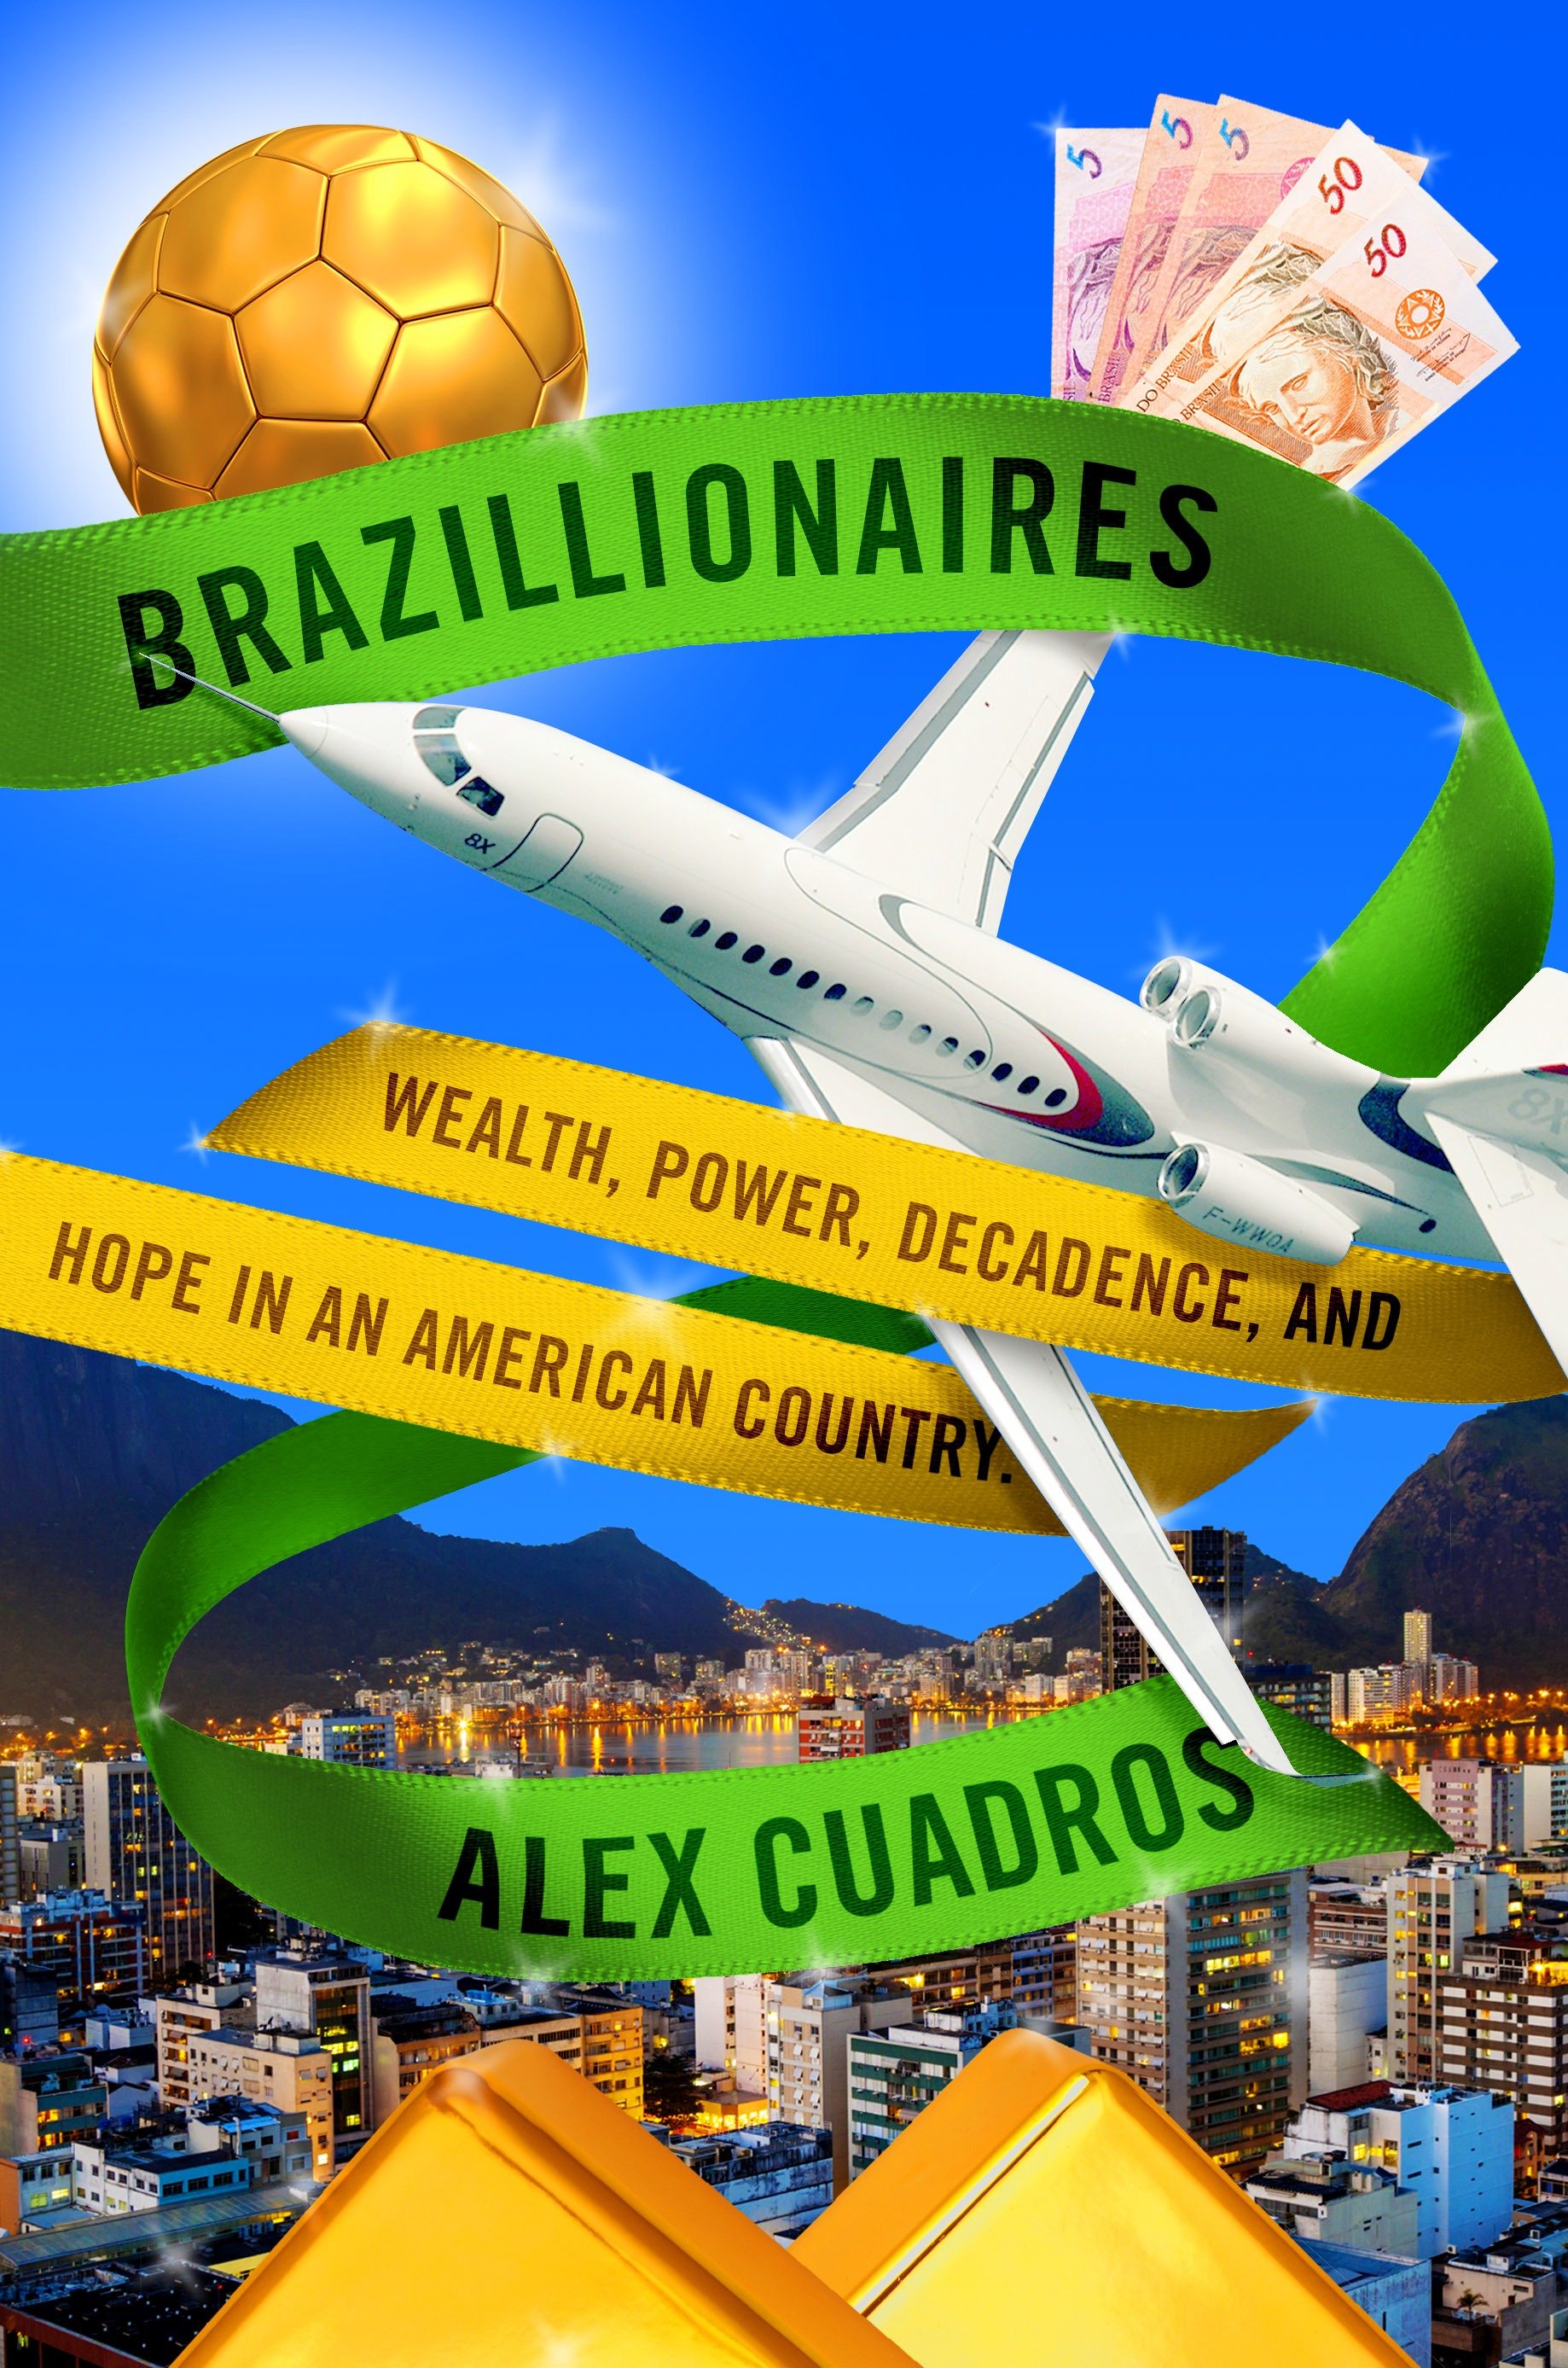 Brazillionaires wealth, power, decadence, and hope in an American country cover image